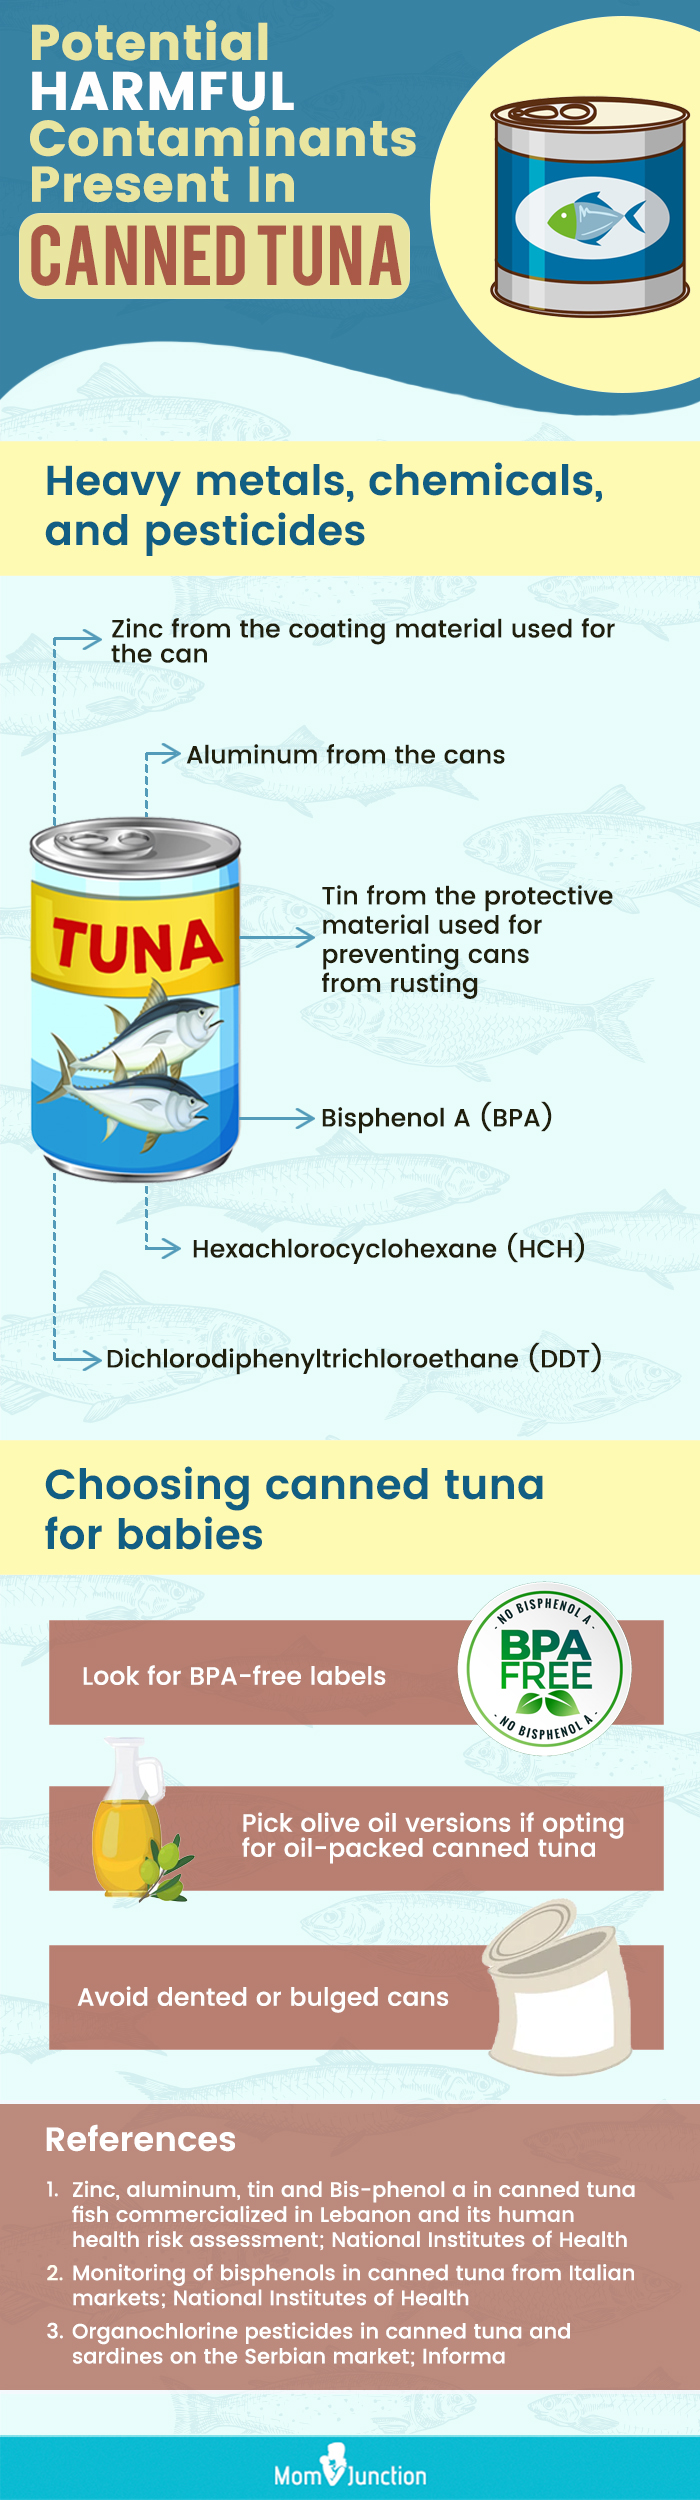 potential harmful contaminants present in canned tuna (infographic)